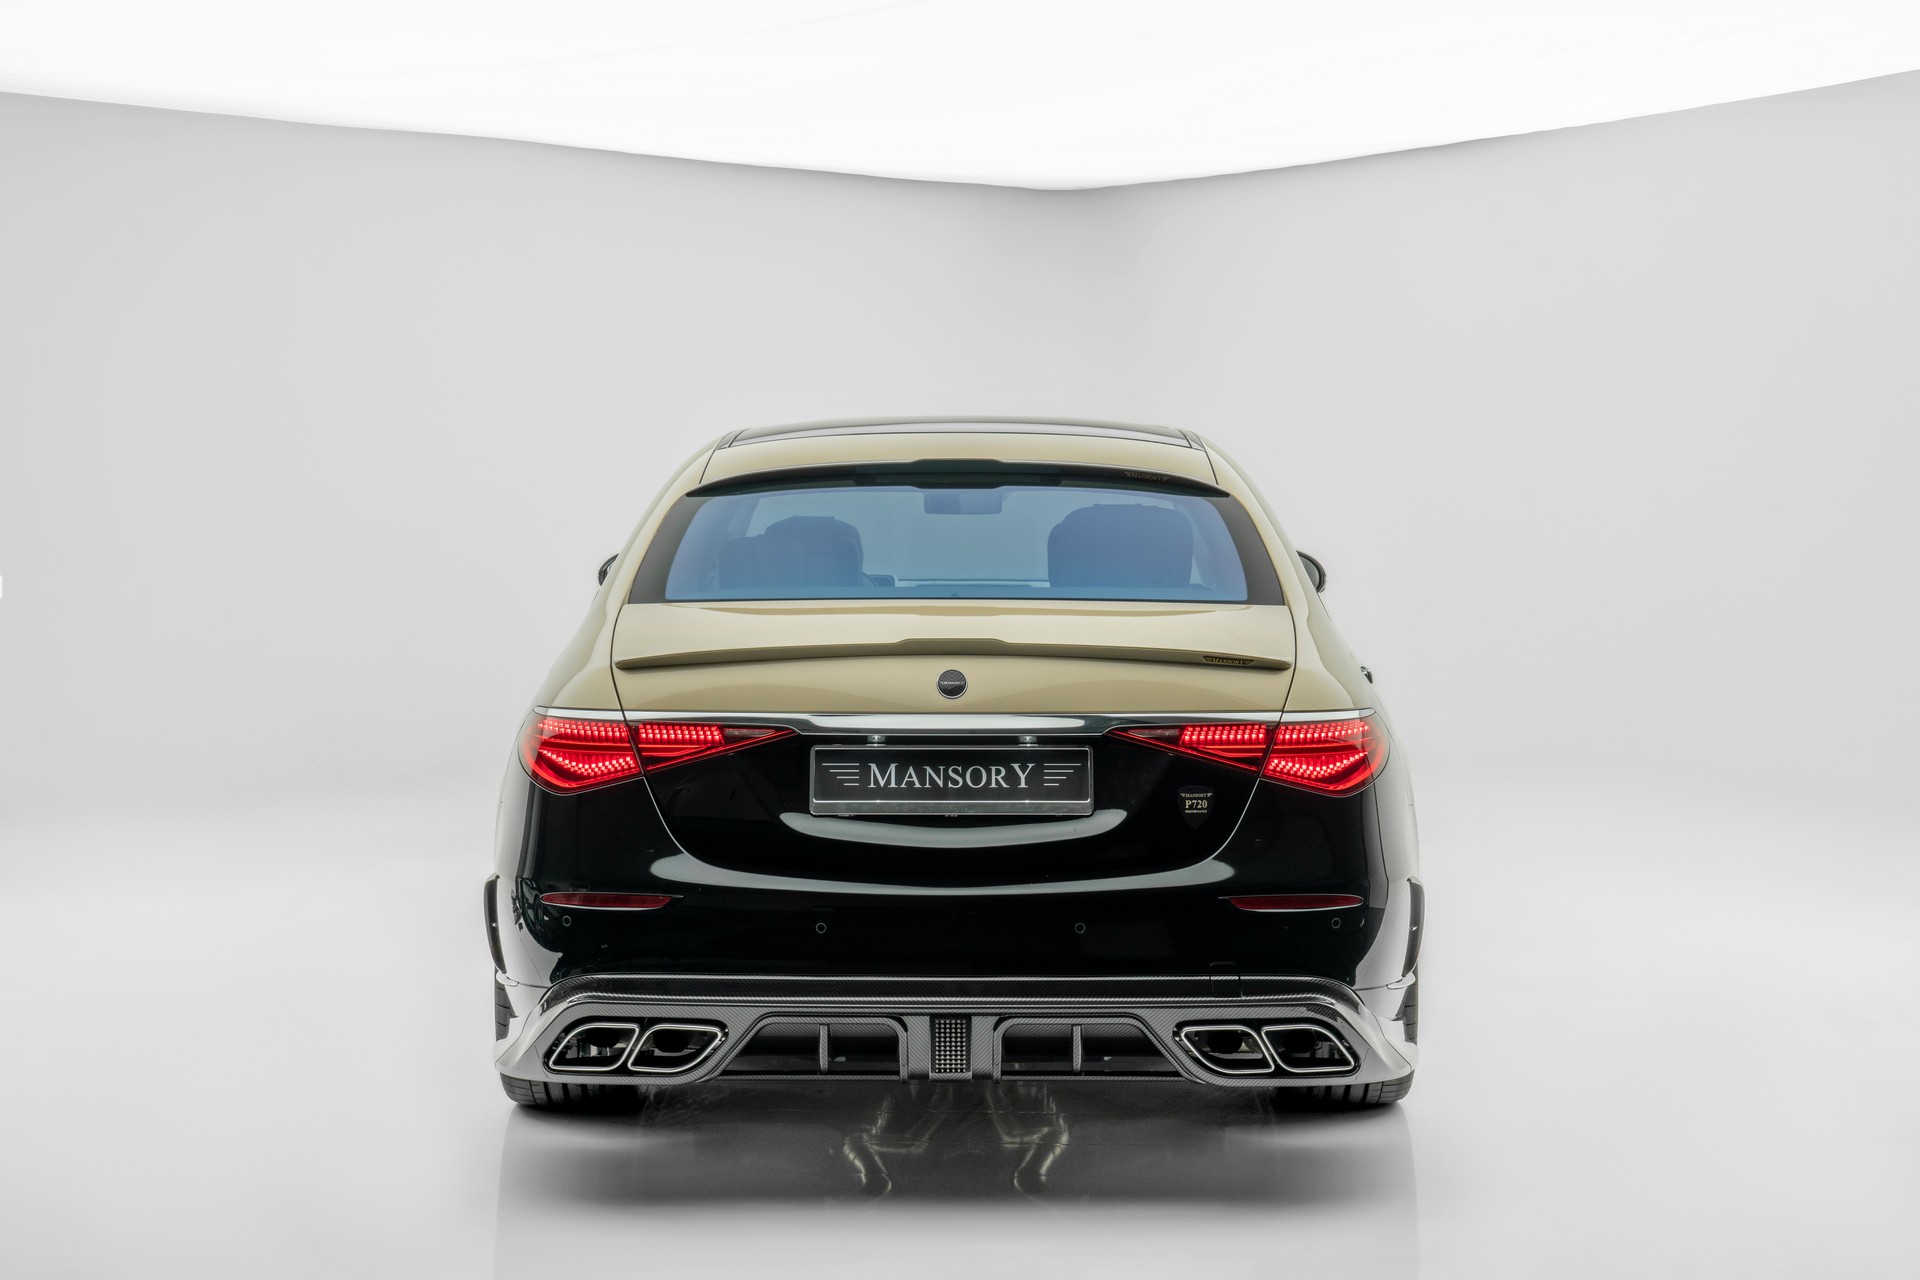 mercedes-maybach-s-class-do-mansory-cafeautovn-14